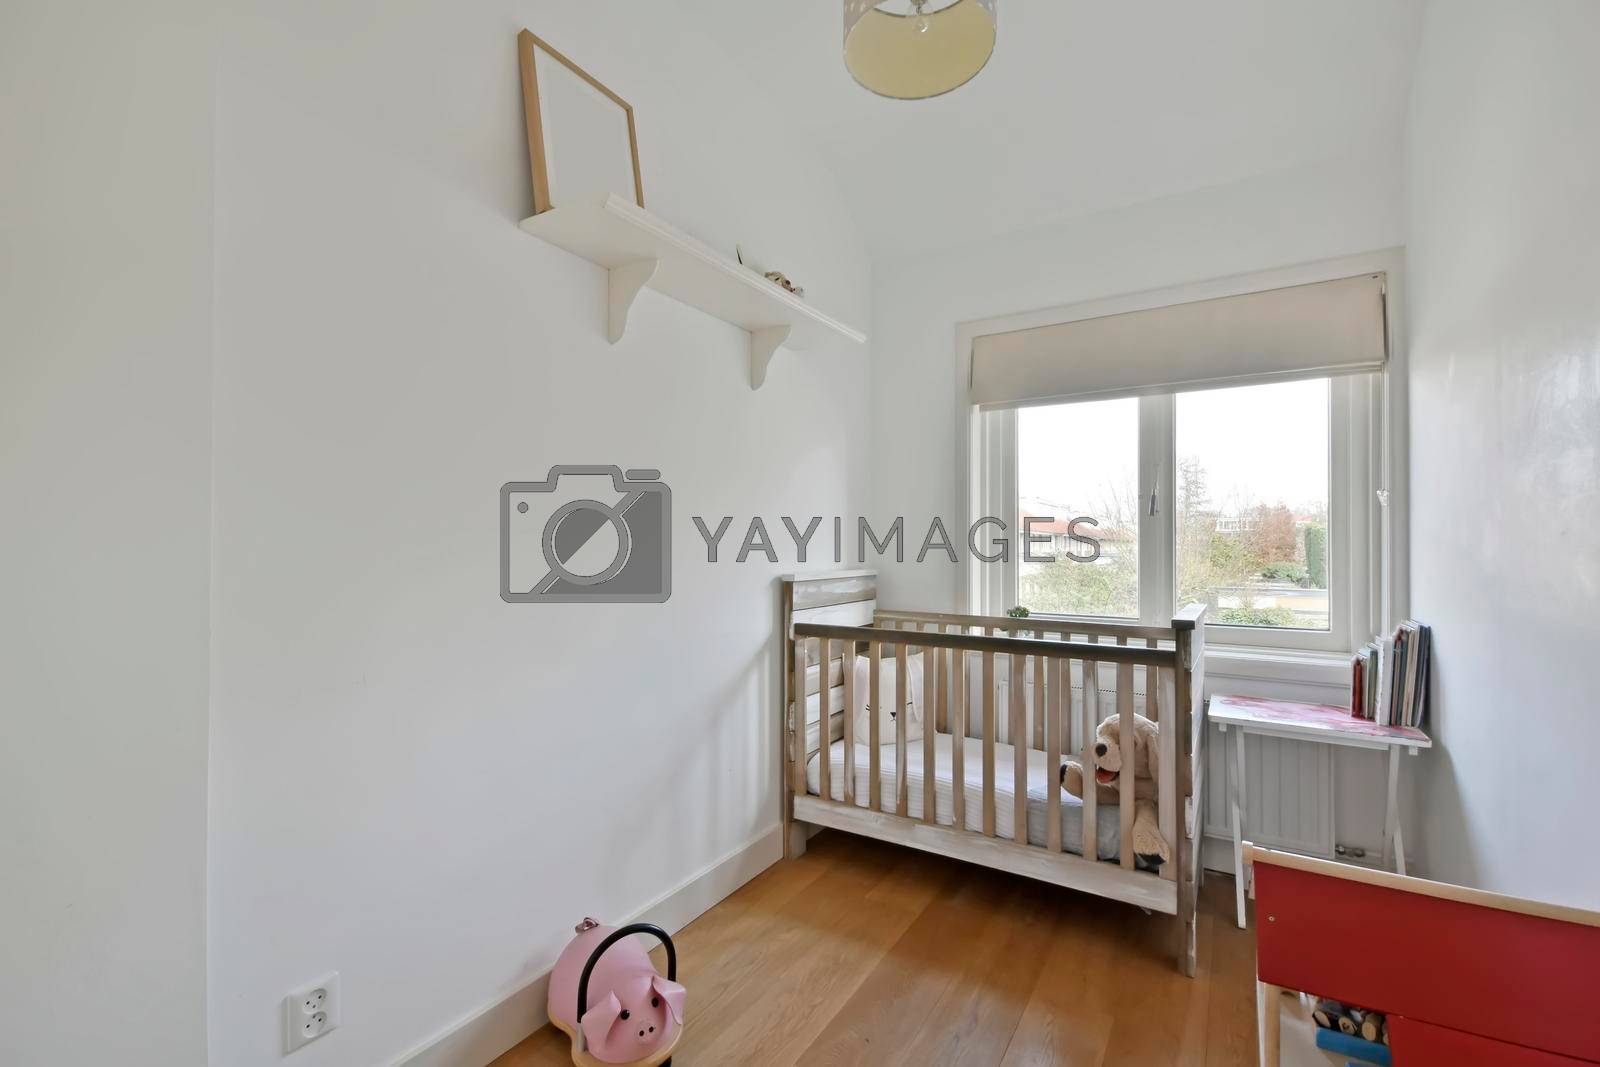 Small children's room for toddlers with a small bed